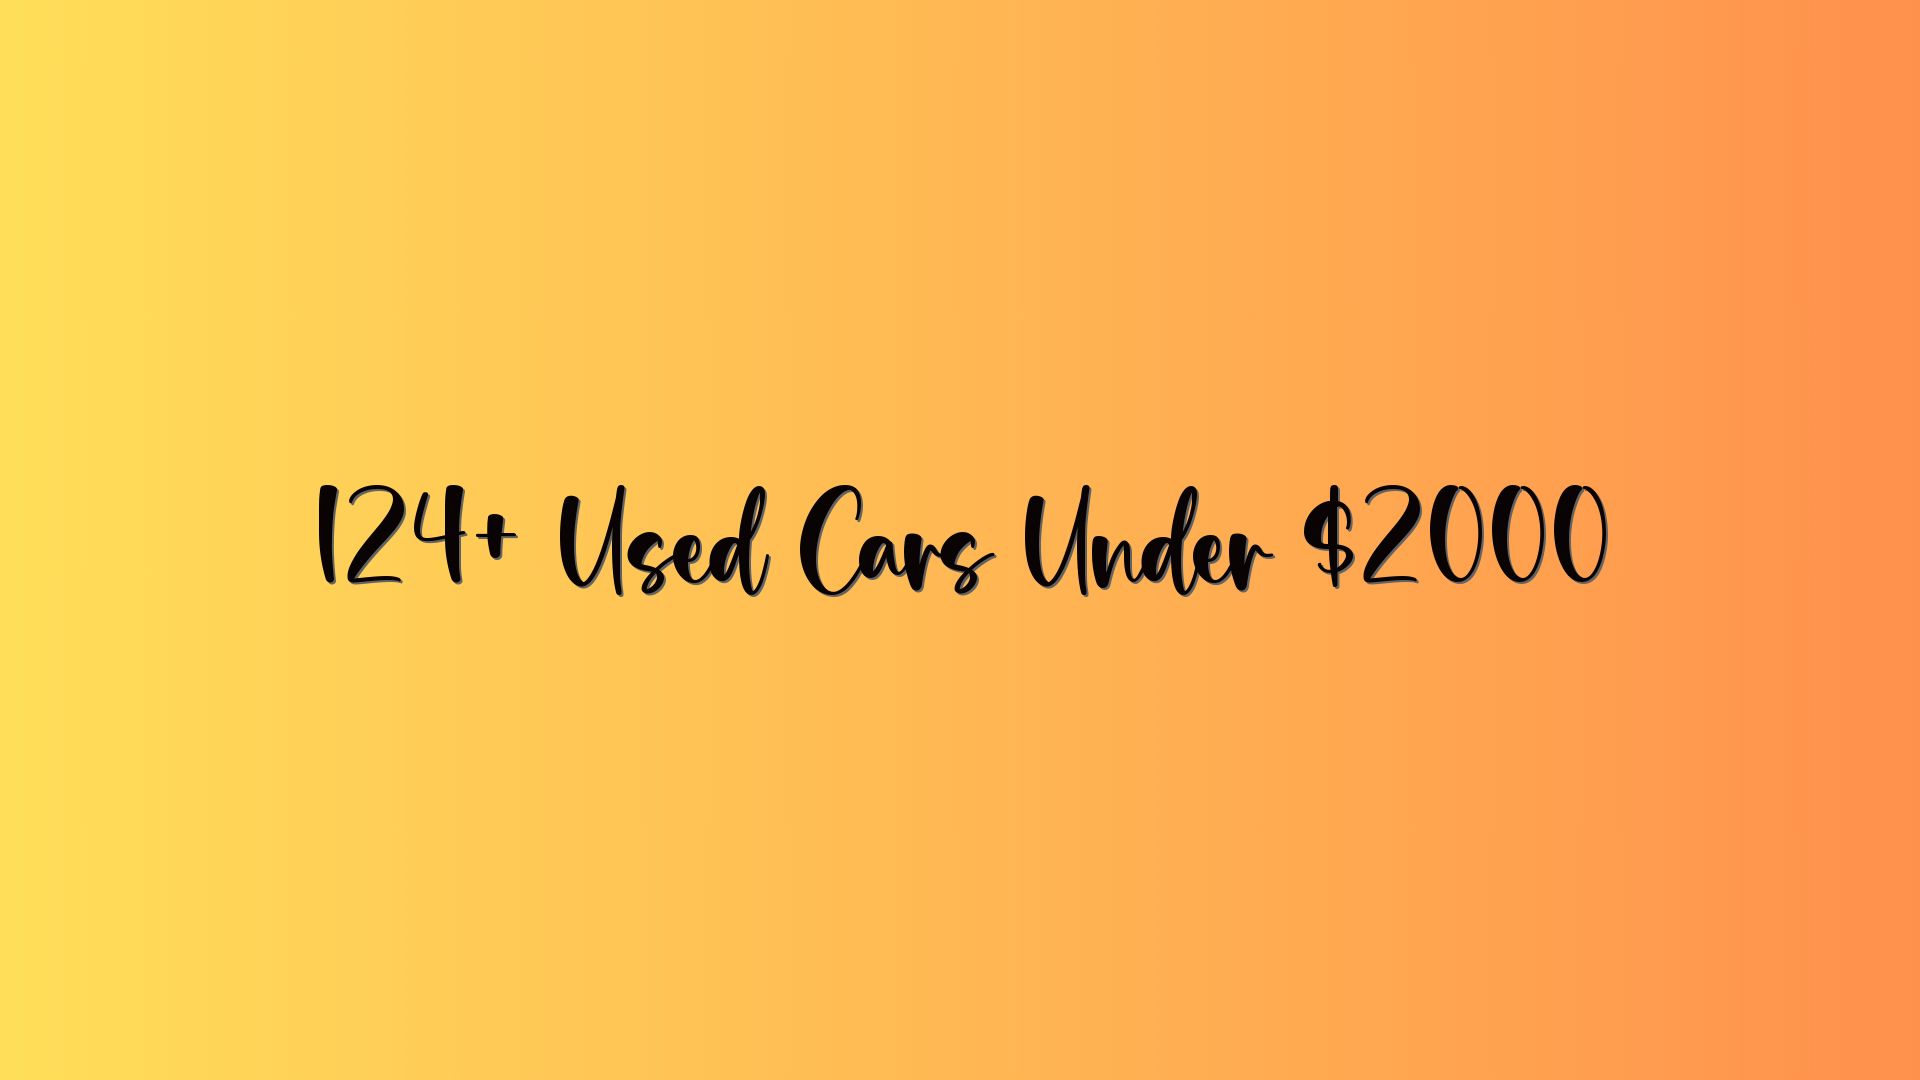 124+ Used Cars Under $2000